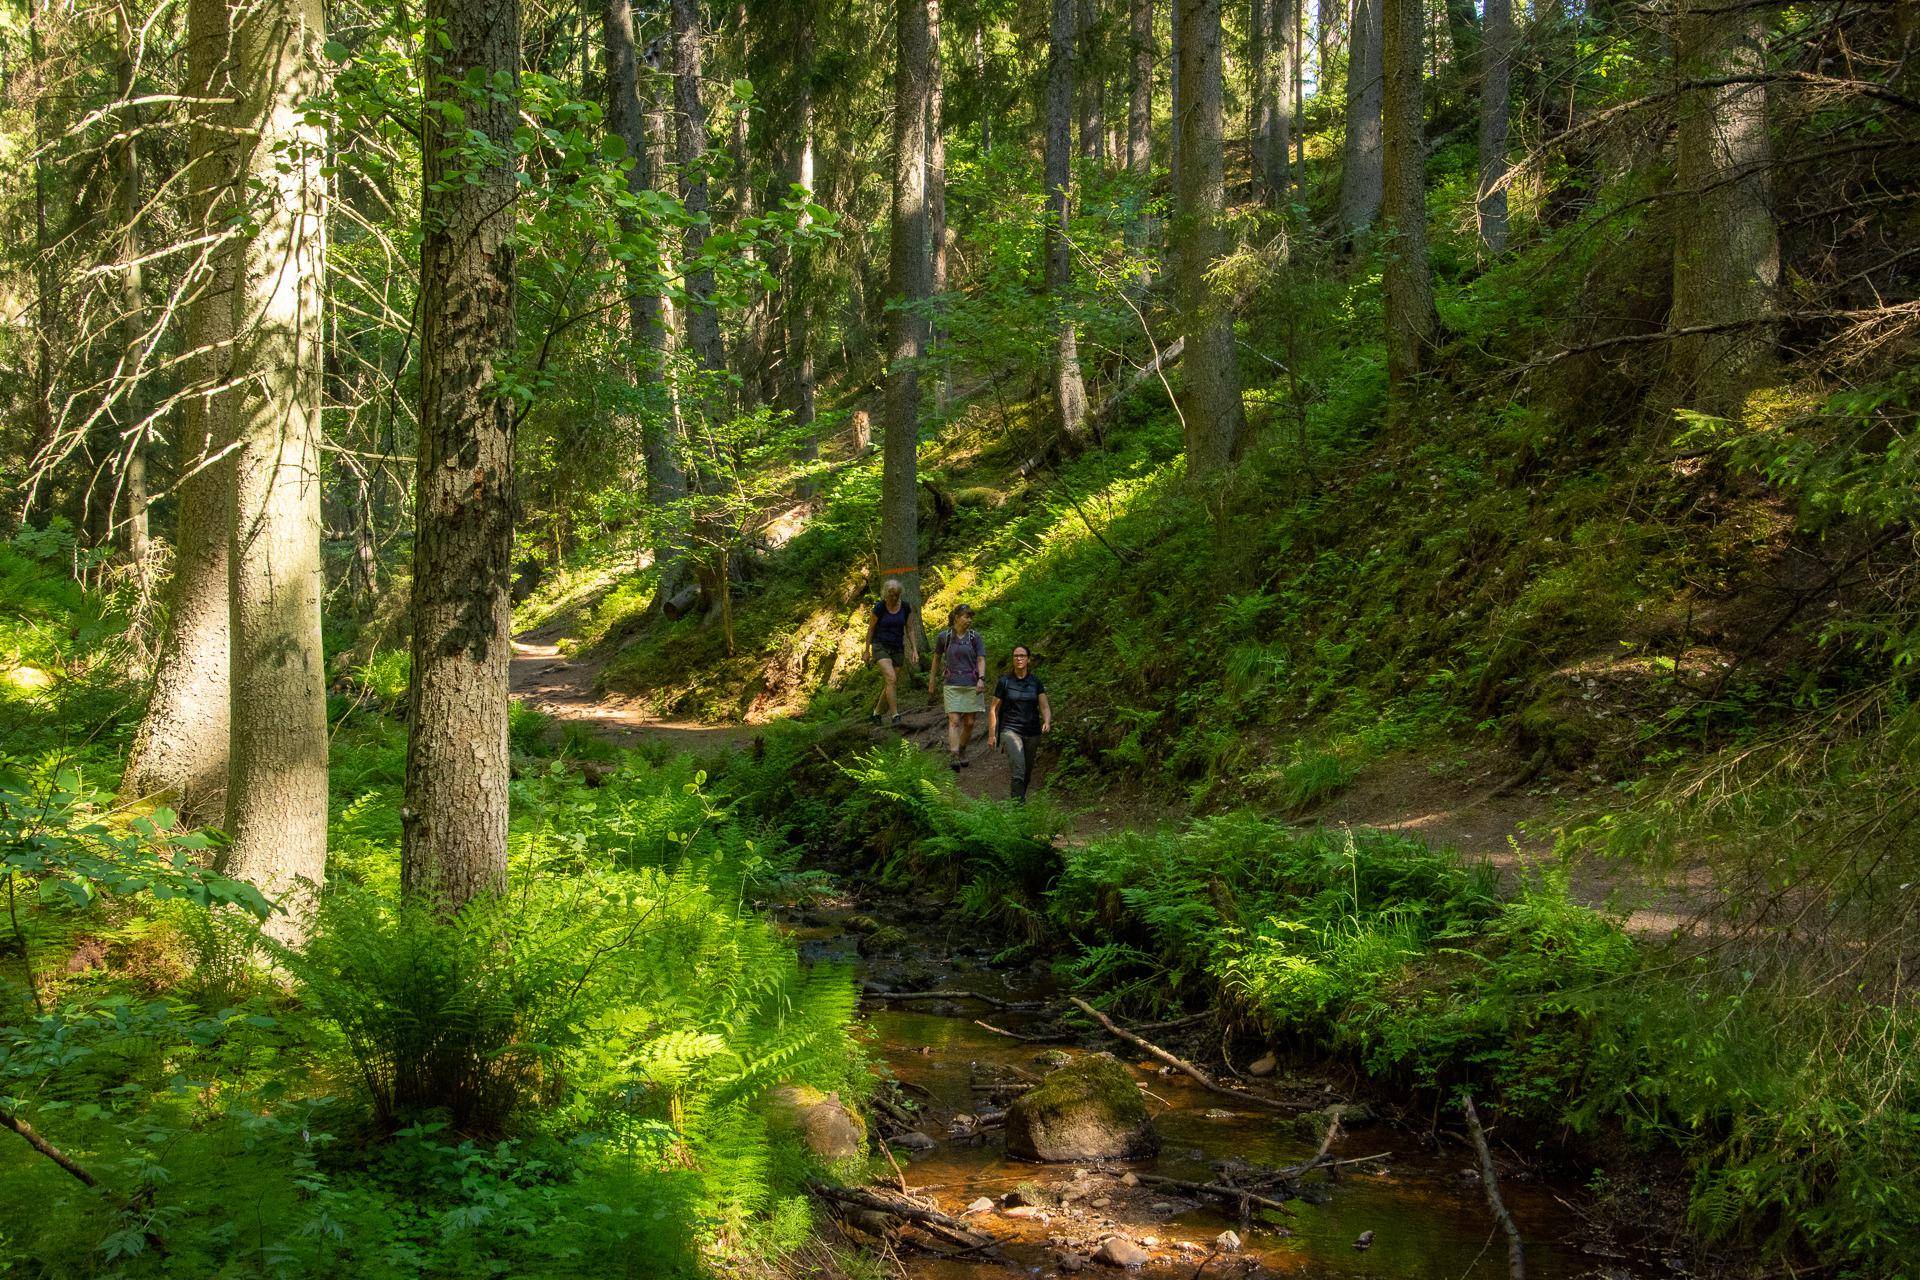 Three people walking on a forrest trail surronded by lush green trees and a small stream.